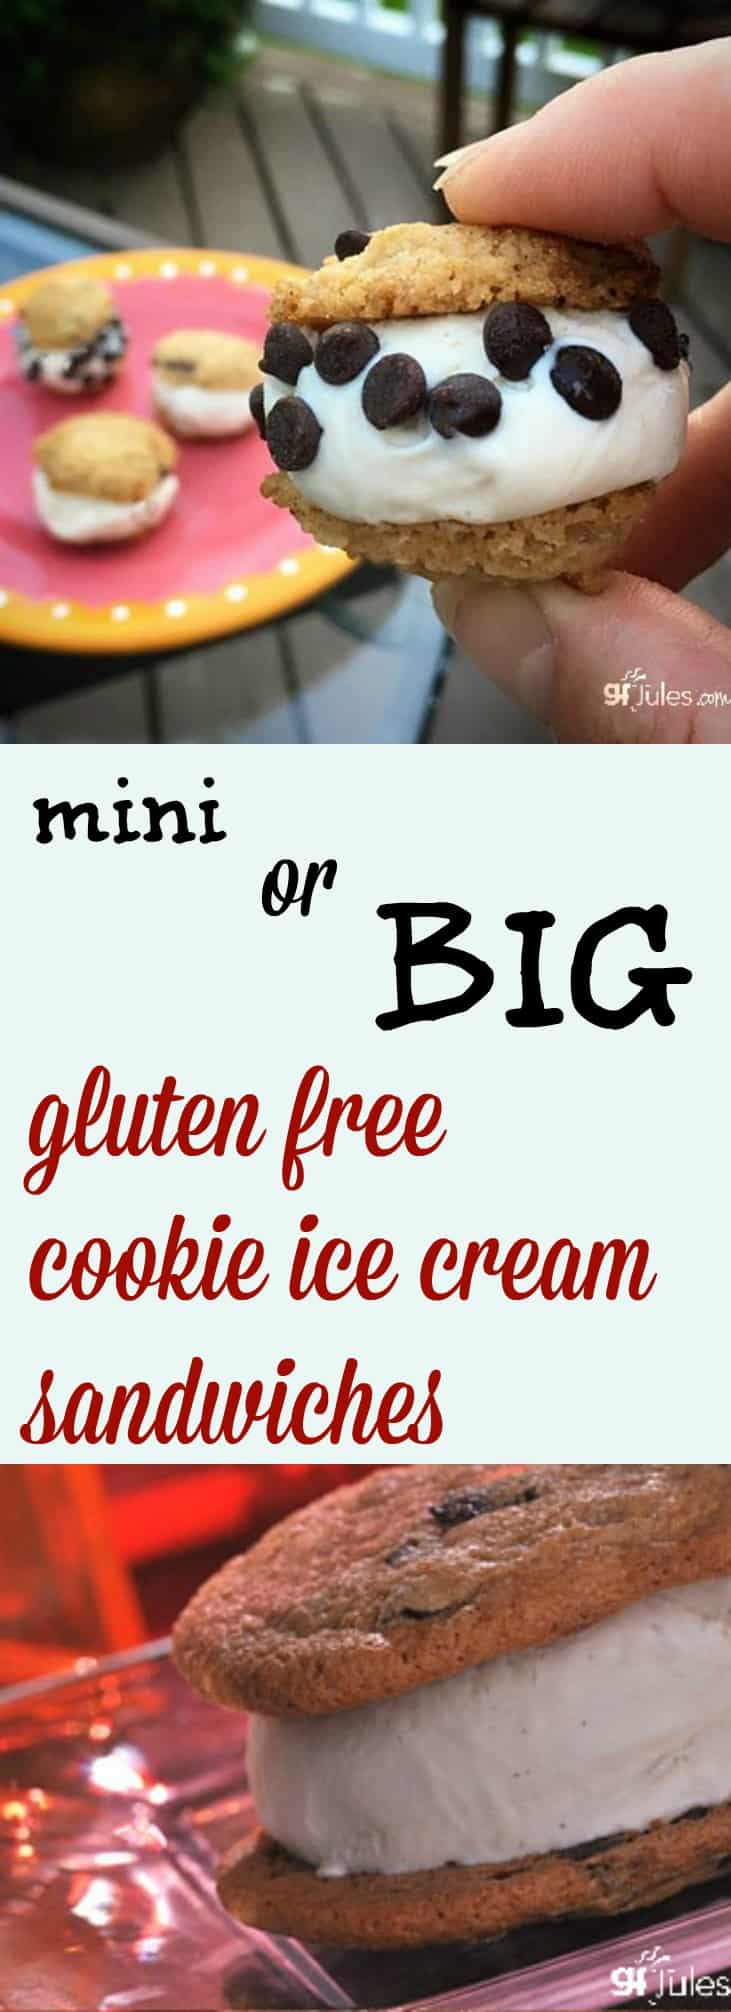 mini or big gluten free chocolate chip cookie ice cream sandwiches make any occasion more fun! Even made dairy-free and/or vegan! gfJules.com